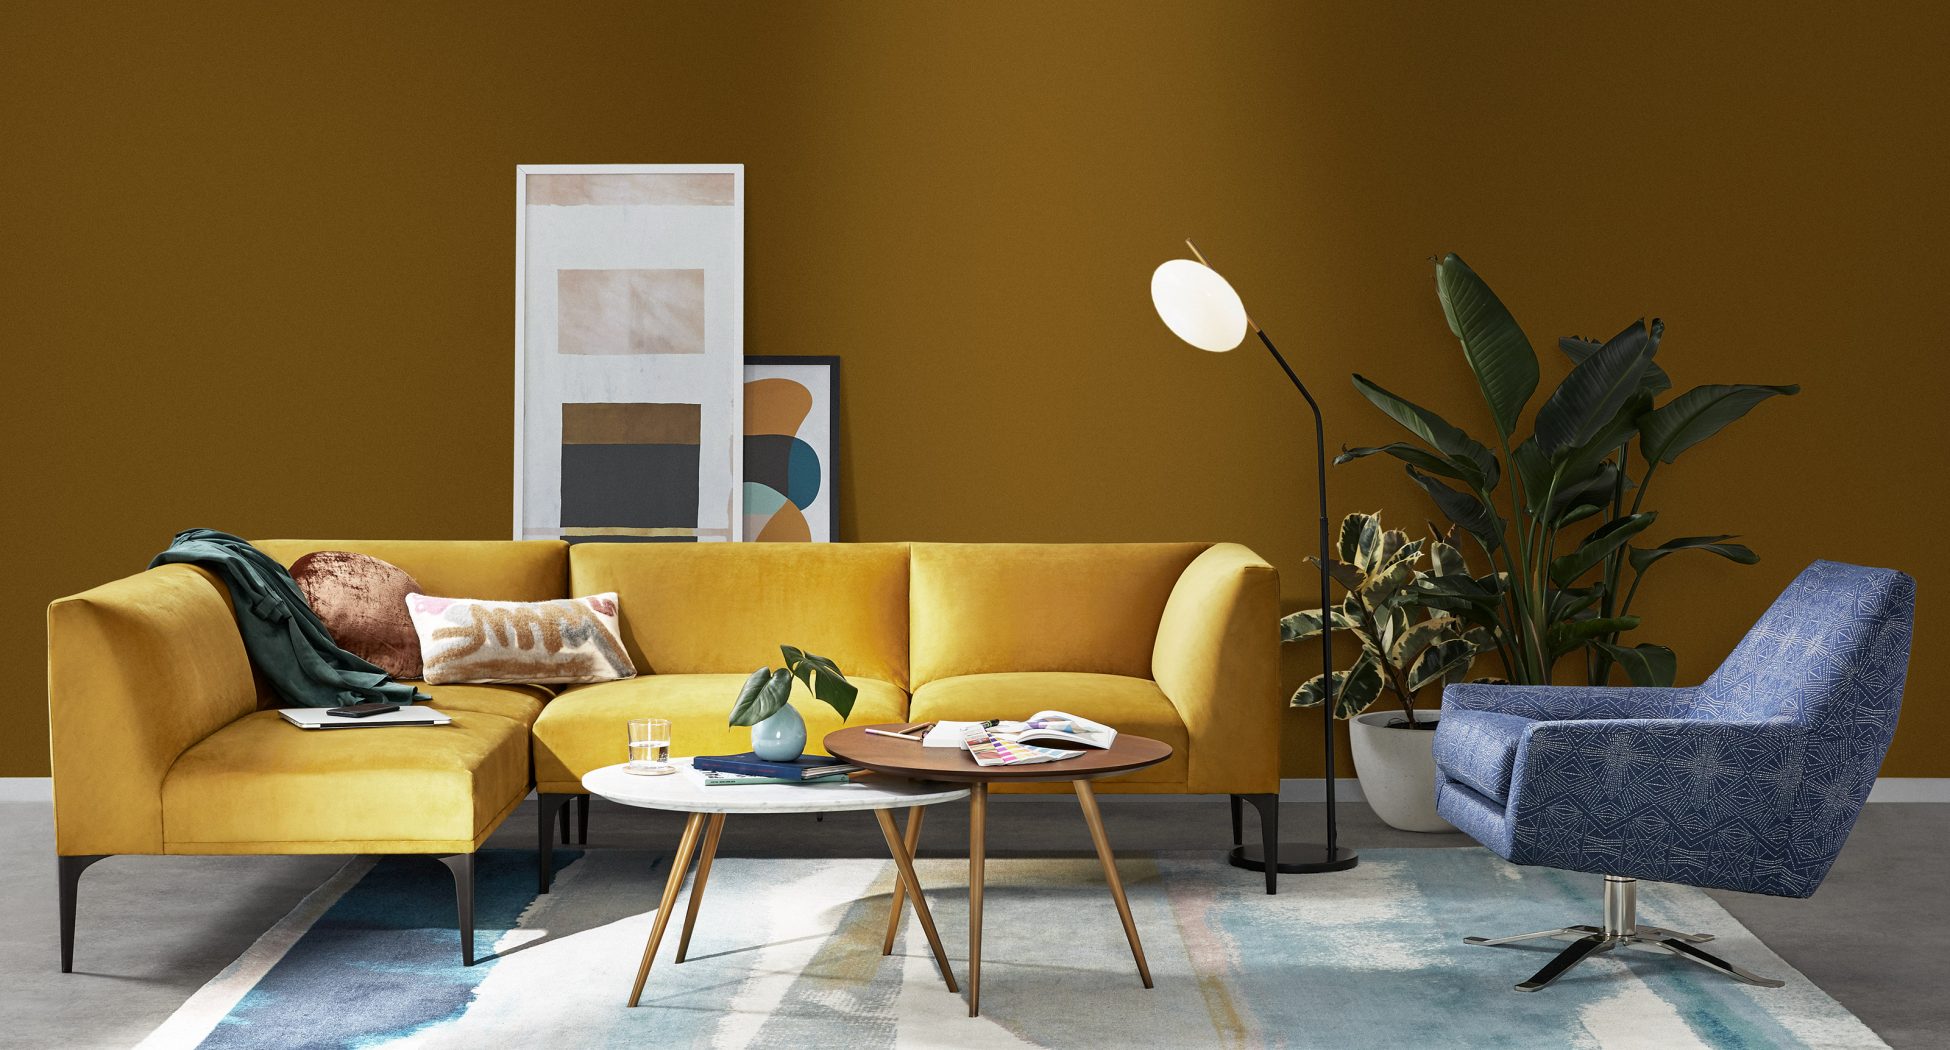 West ELM discount Coupon code: GFPJ | Upto 50% Discount Code.hop West Elm online to find all types of luxury home furniture at best prices.